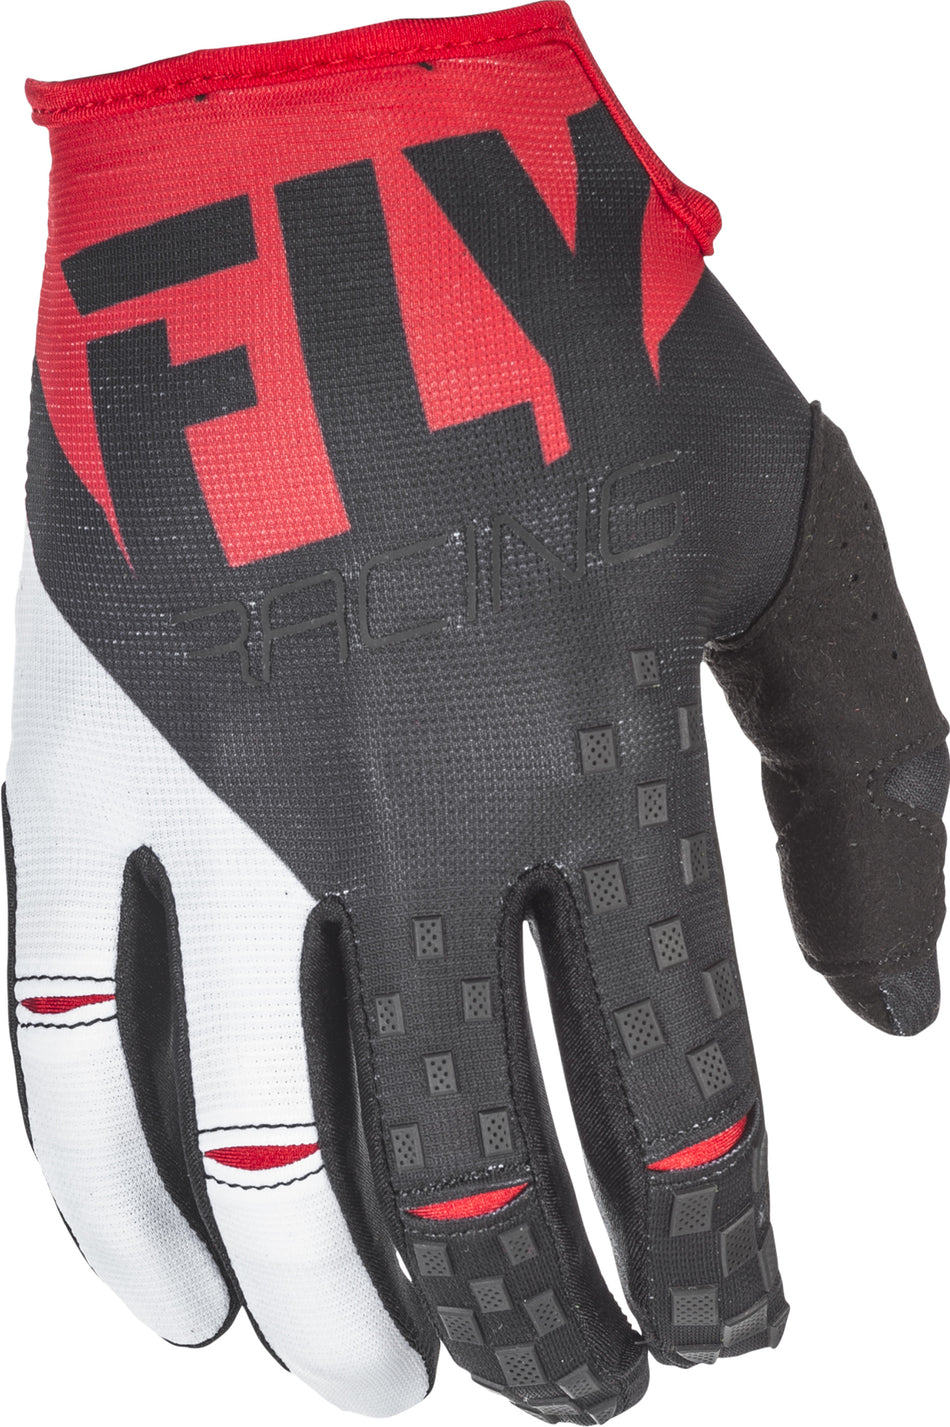 FLY RACING Kinetic Gloves Red/Black Sz 8 371-41208